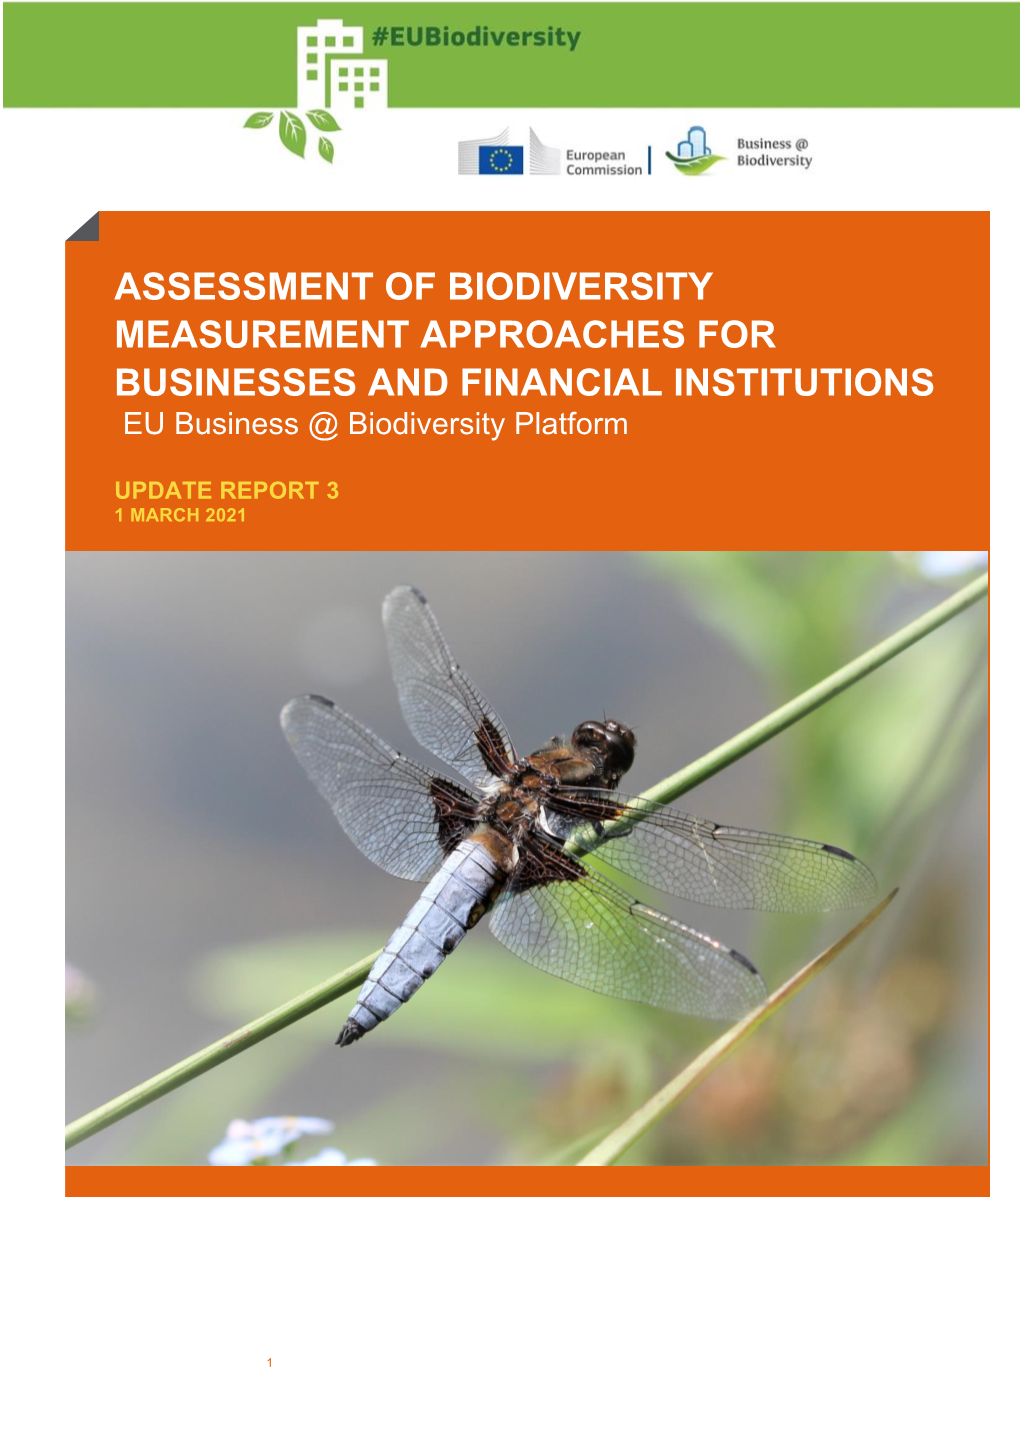 ASSESSMENT of BIODIVERSITY MEASUREMENT APPROACHES for BUSINESSES and FINANCIAL INSTITUTIONS CR EU Business @ Biodiversity Platformitical